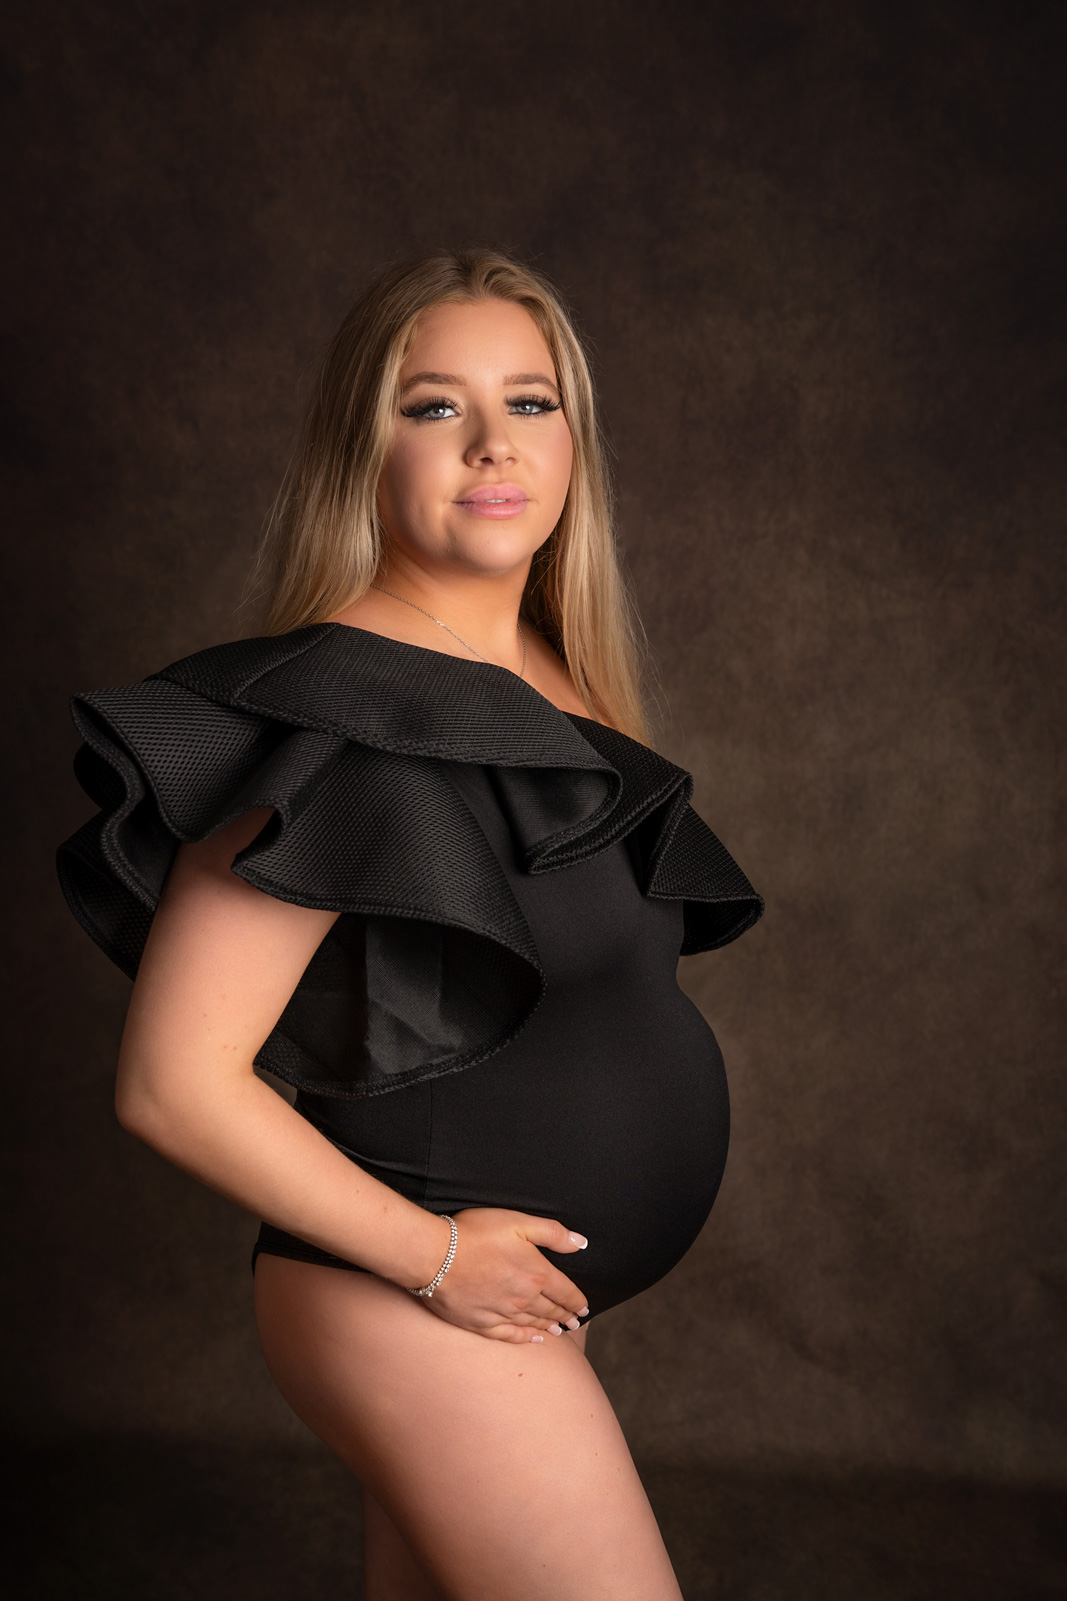 Pregnant lady wearing a black bodysuit with exaggerated shoulder detail, gazing at the camera.